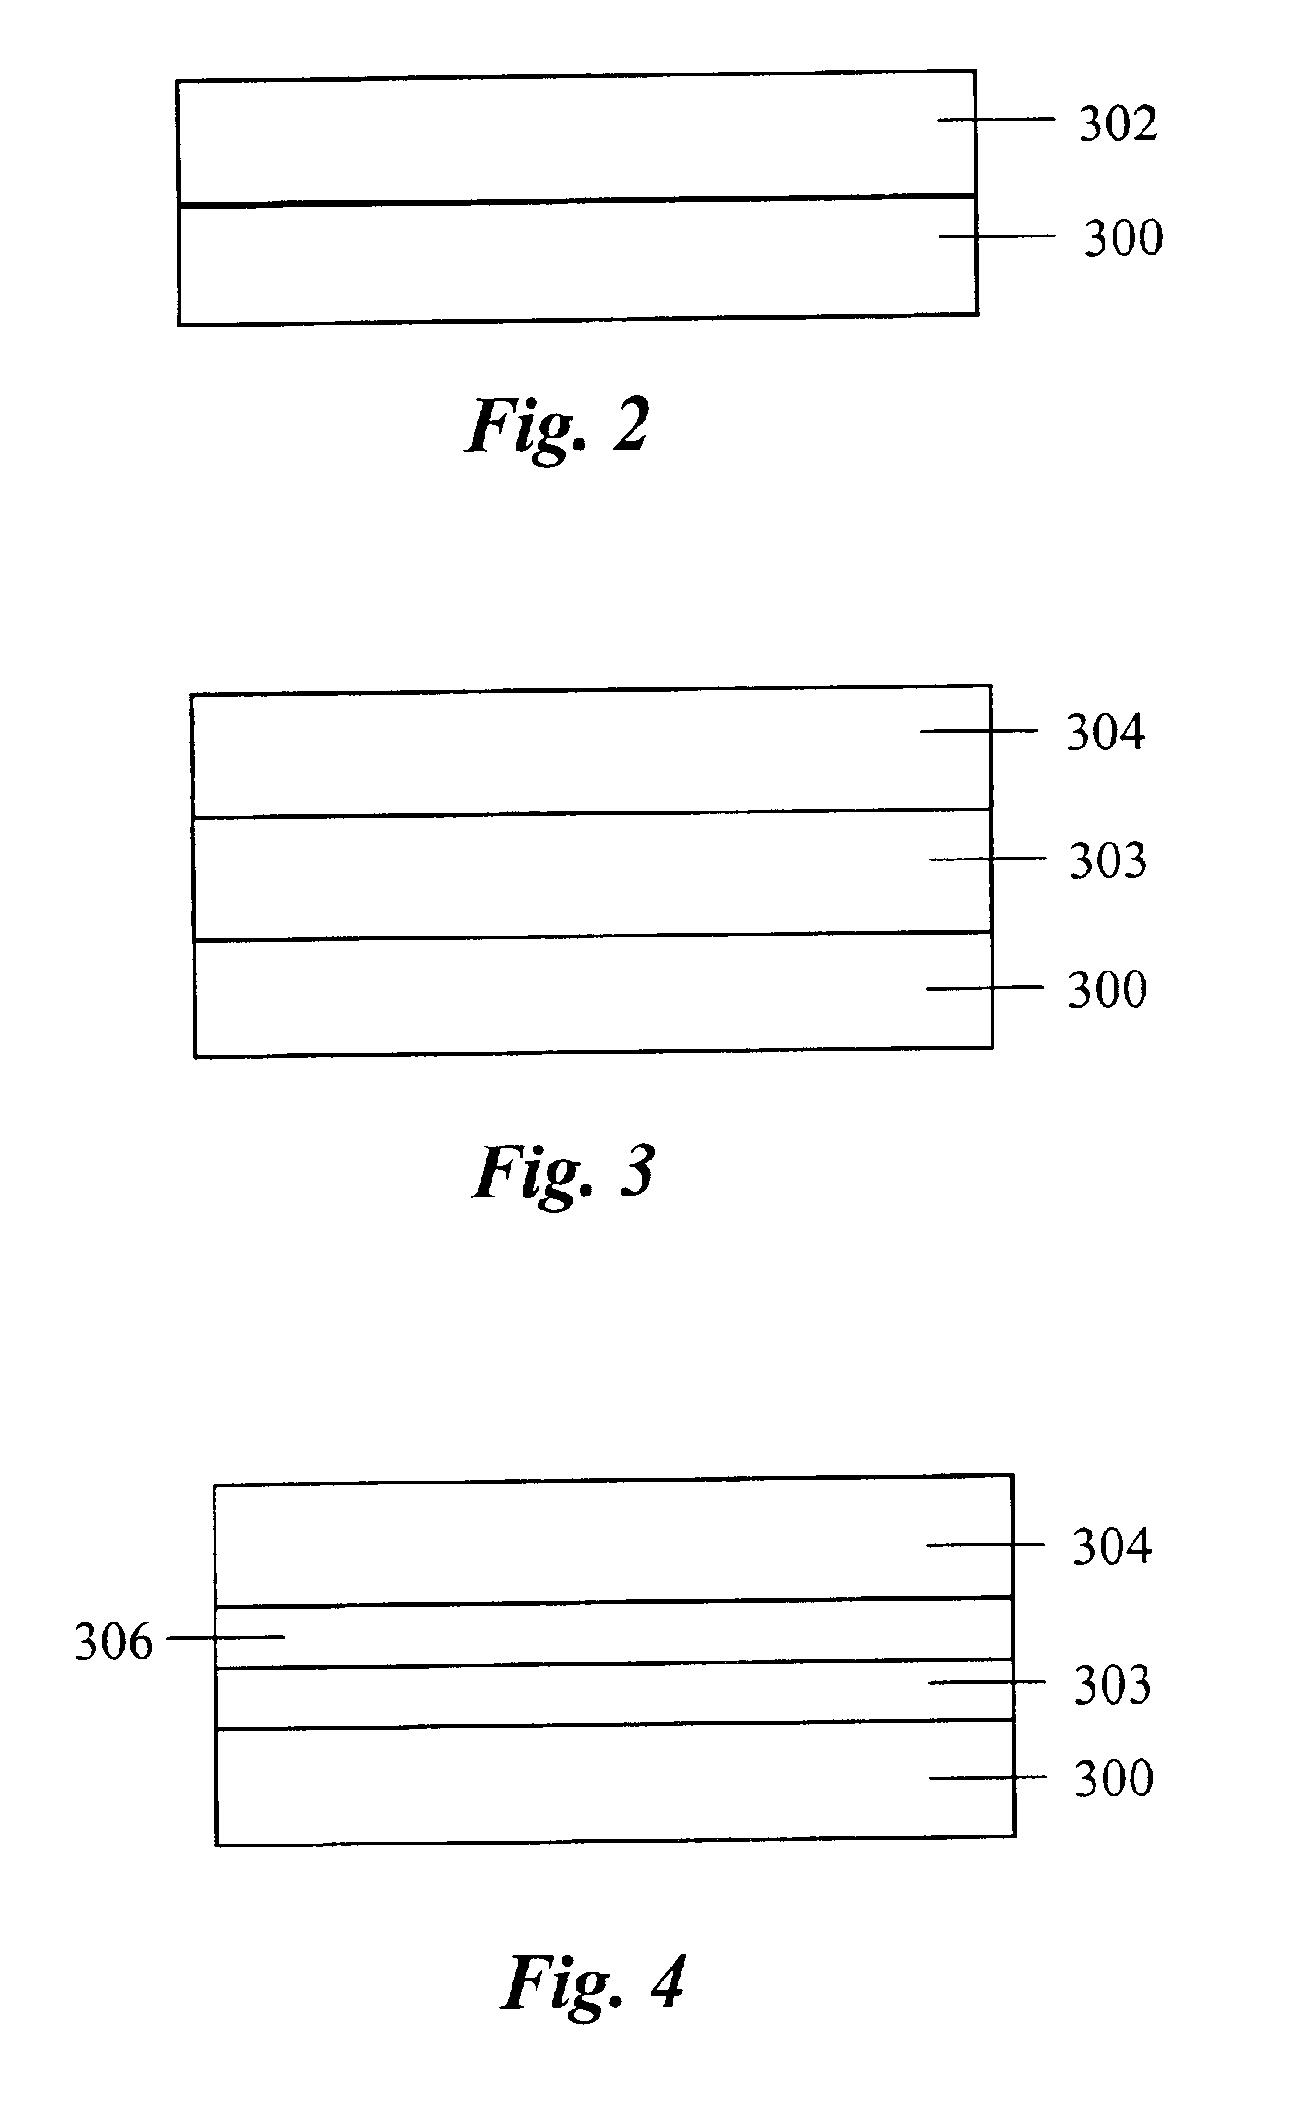 Optical bodies containing cholesteric liquid crystal material and methods of manufacture